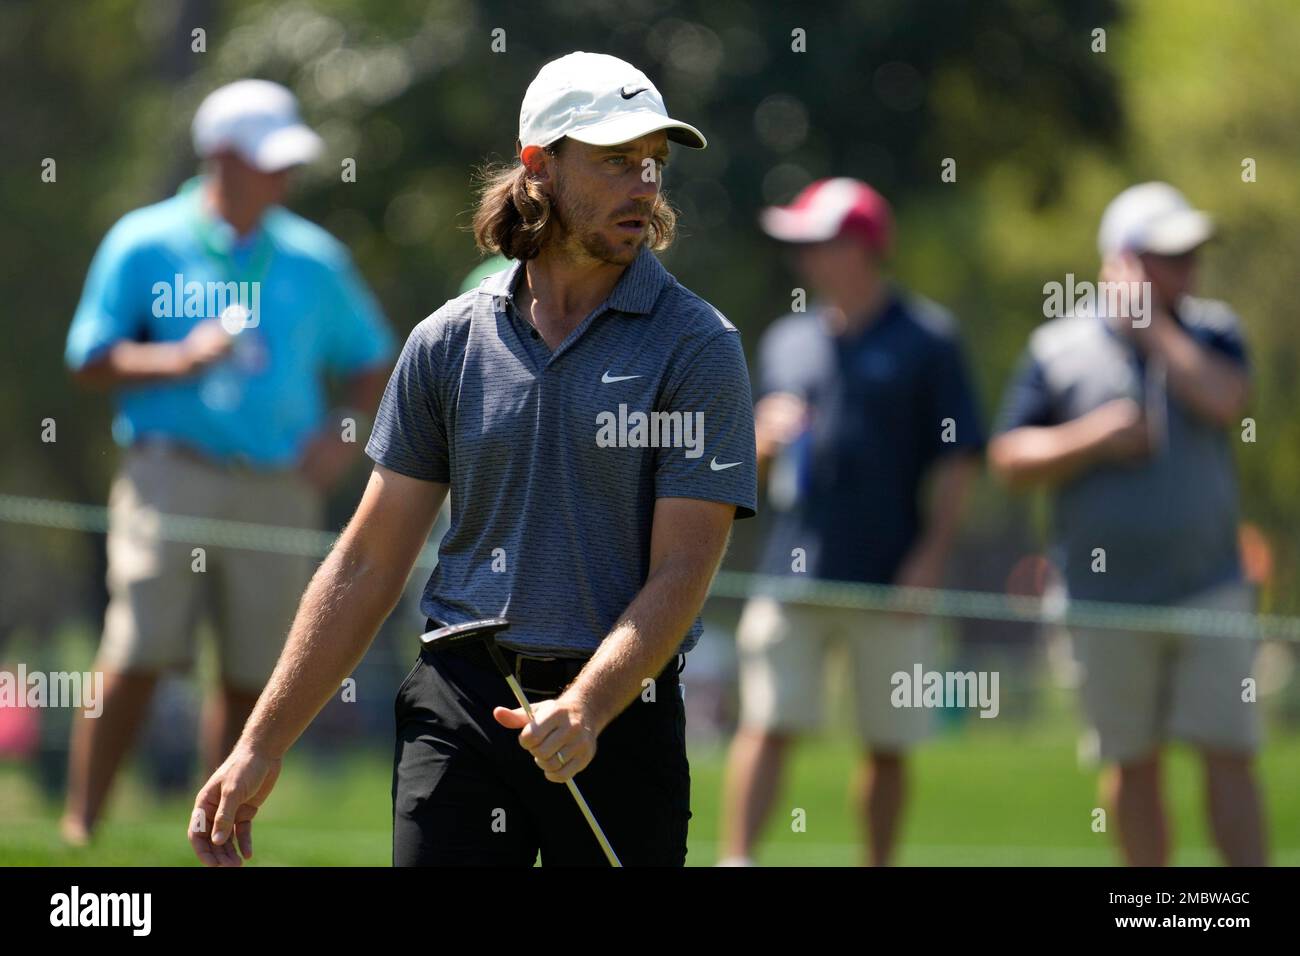 Tommy Fleetwood during the second round of the Valspar Championship golf tournament Friday, March 18, 2022, at Innisbrook in Palm Harbor, Fla